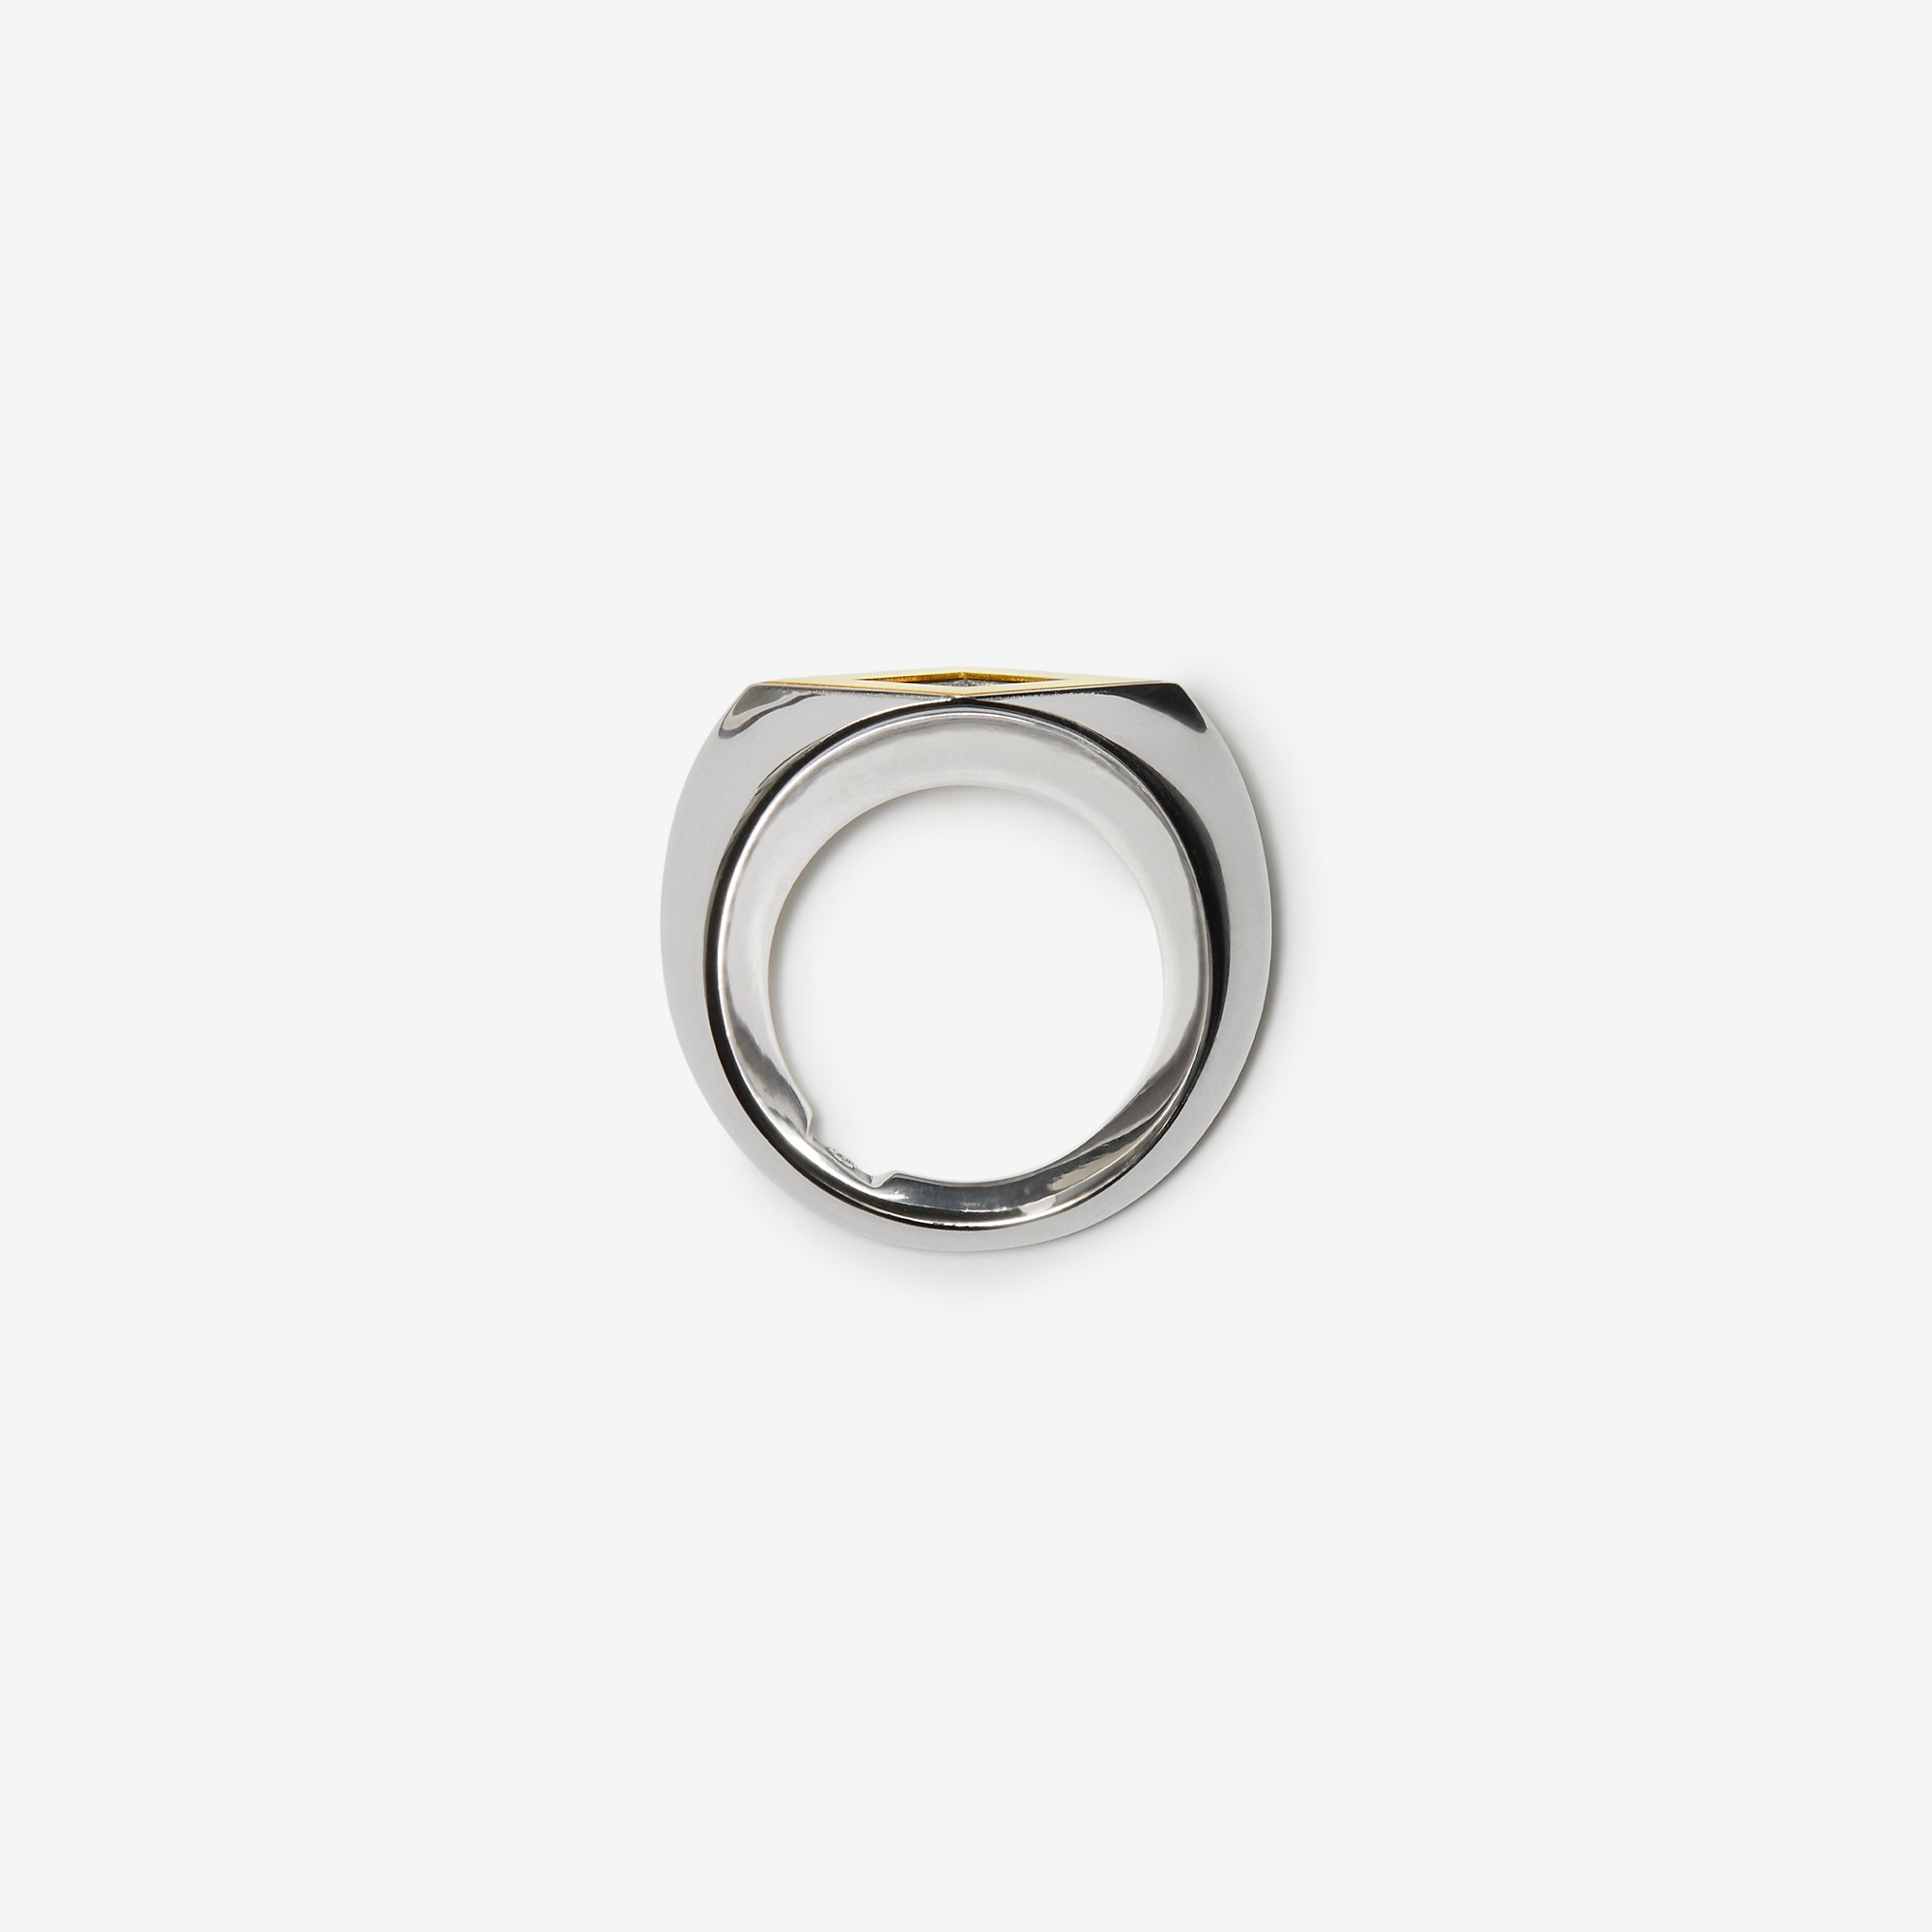 Silver and Gold-plated Hollow Ring - 2